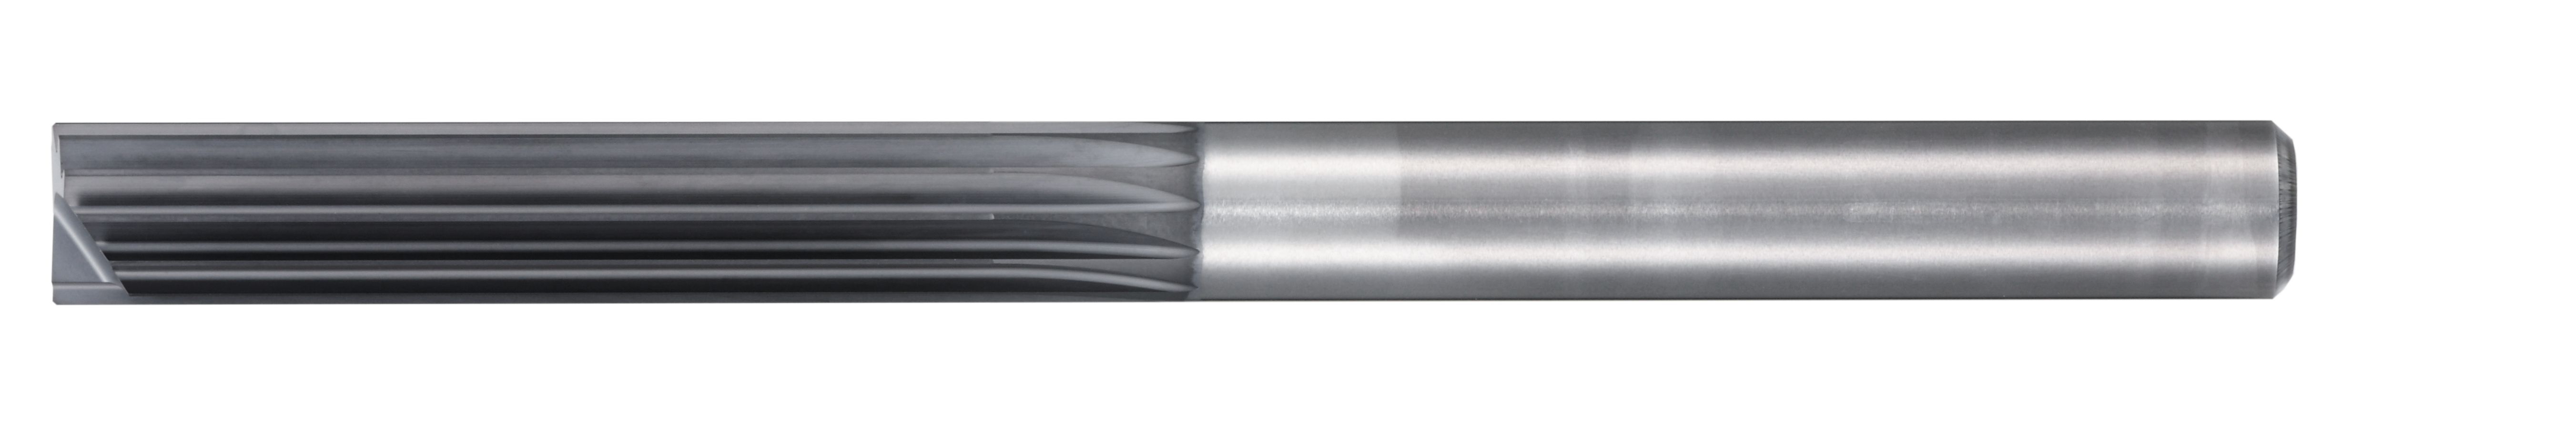 Grooving/Shouldering Multi-Flute End Mill for CFRP with End Flute CR100 6719 (6719-006.000) 